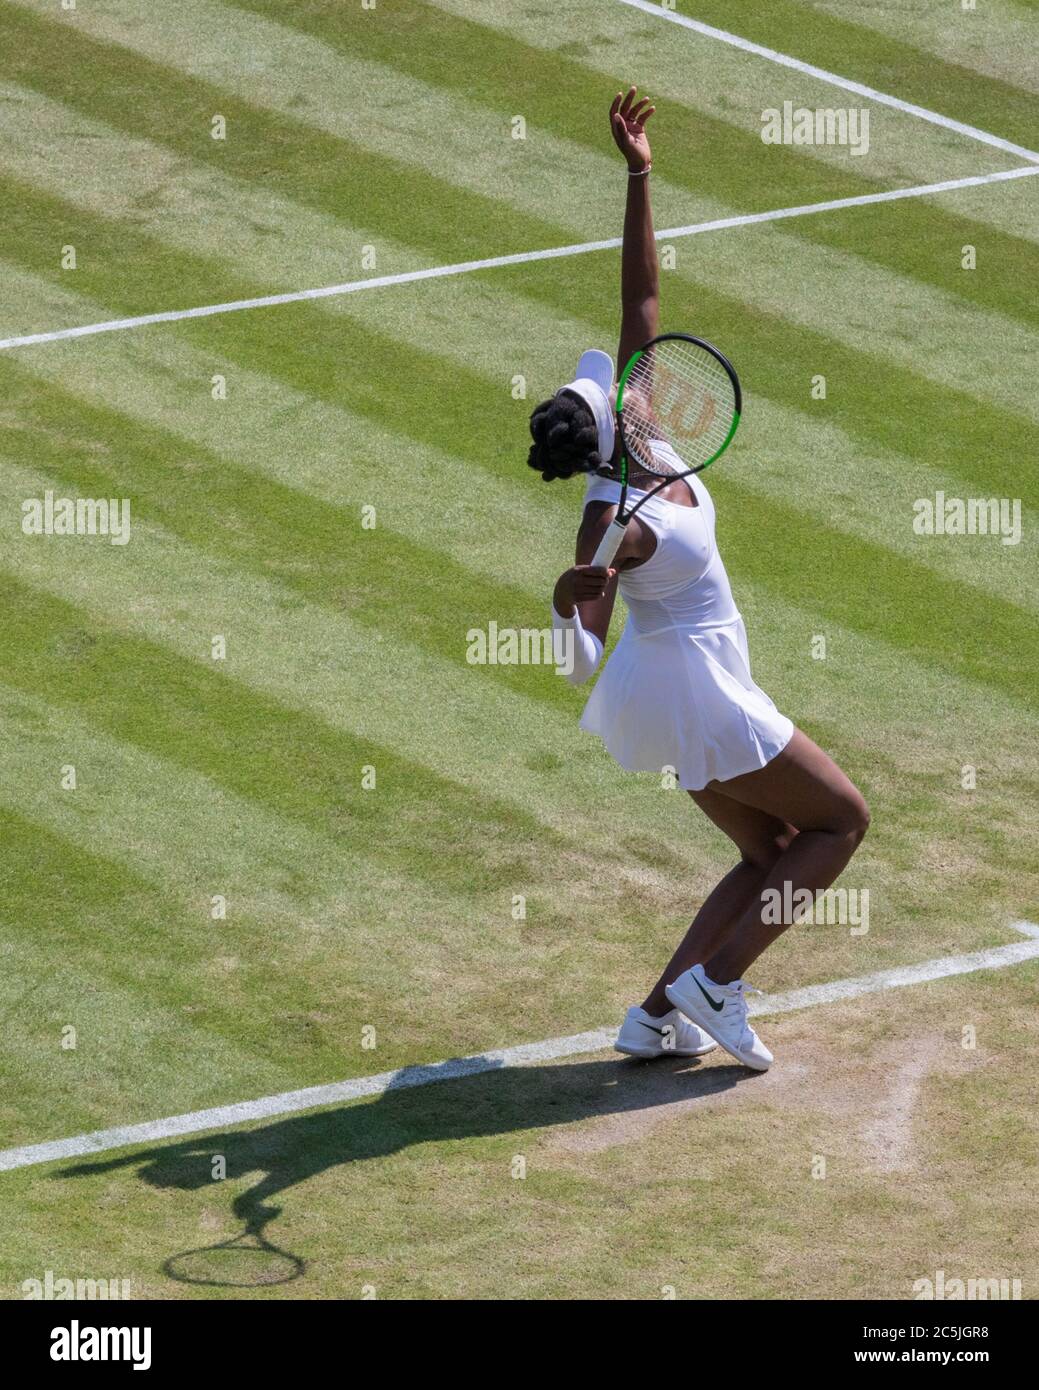 American Tennis player Venus Williams serves in a match at The Championships 2018, Wimbledon All England Lawn Tennis Club, London, UK Stock Photo